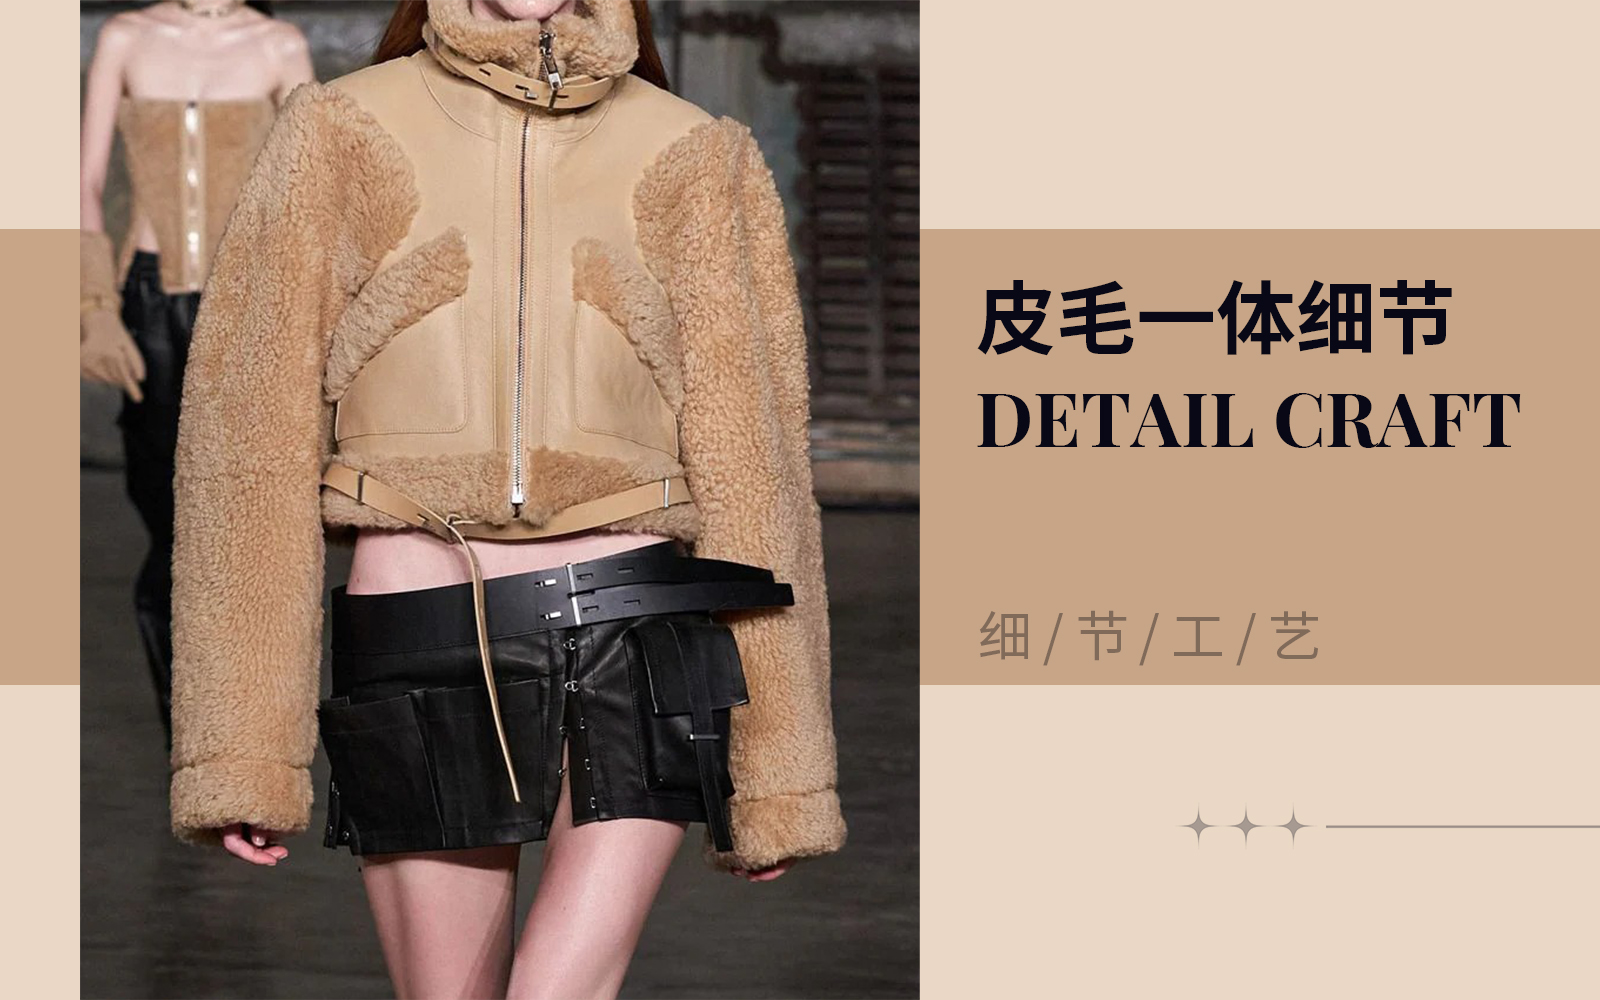 Shearling -- The Detail & Craft Trend for Women's Leather & Fur